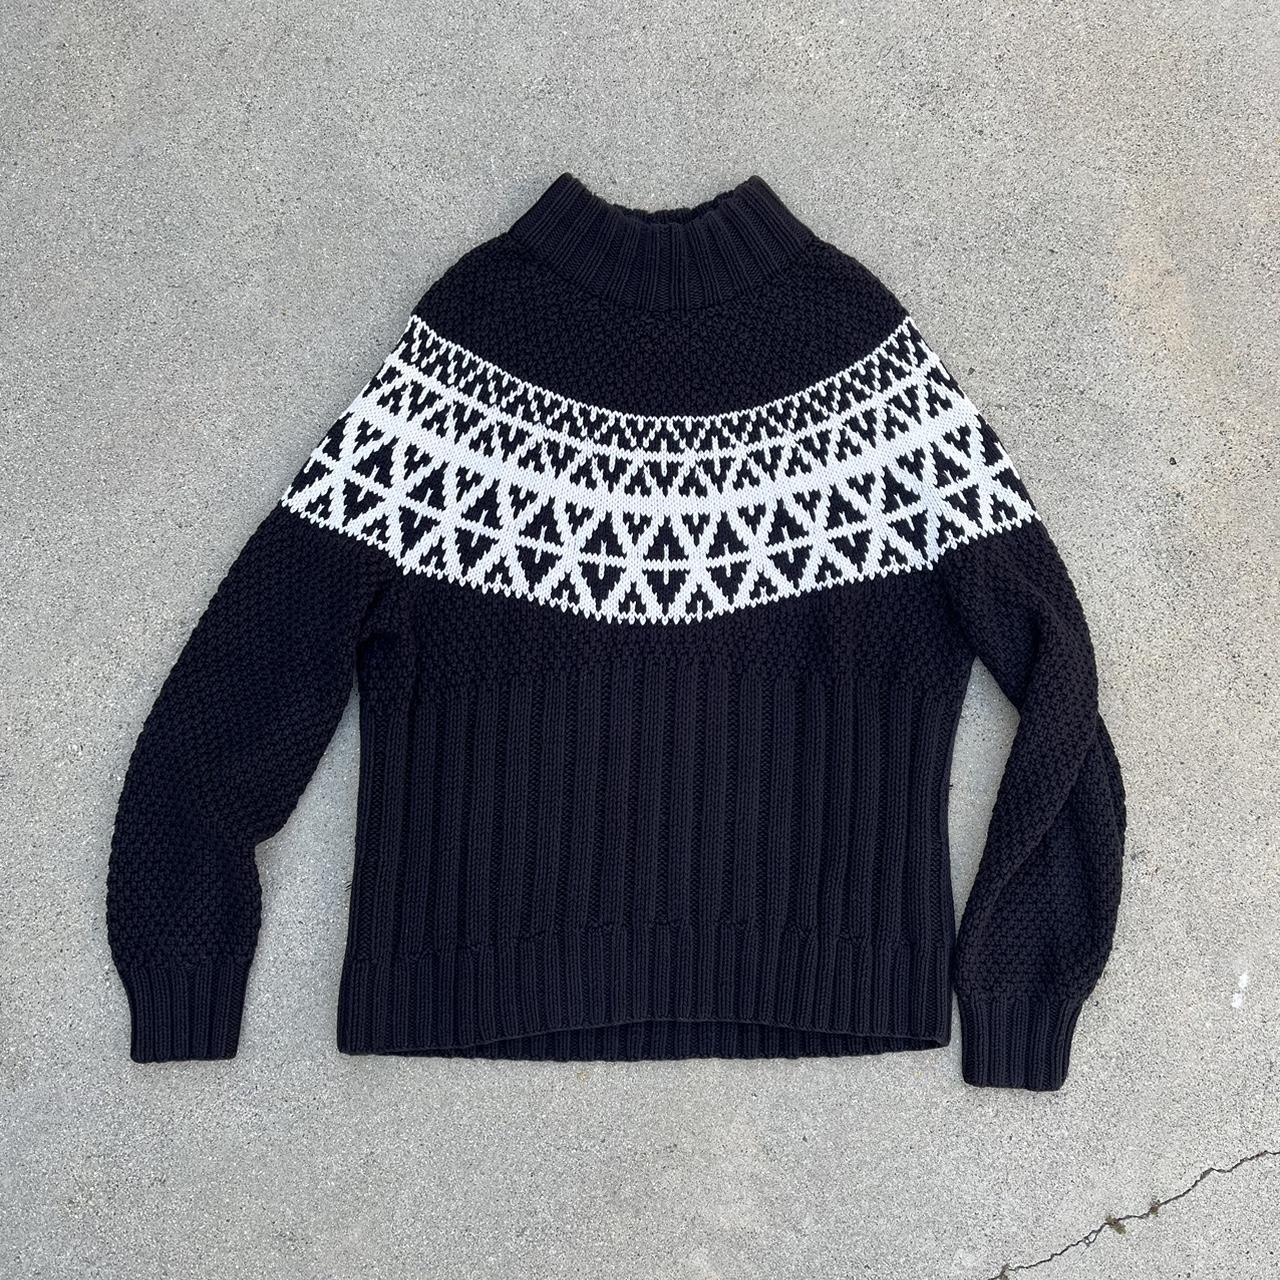 One of the Softest Knitted Black/White Turtle Neck... - Depop